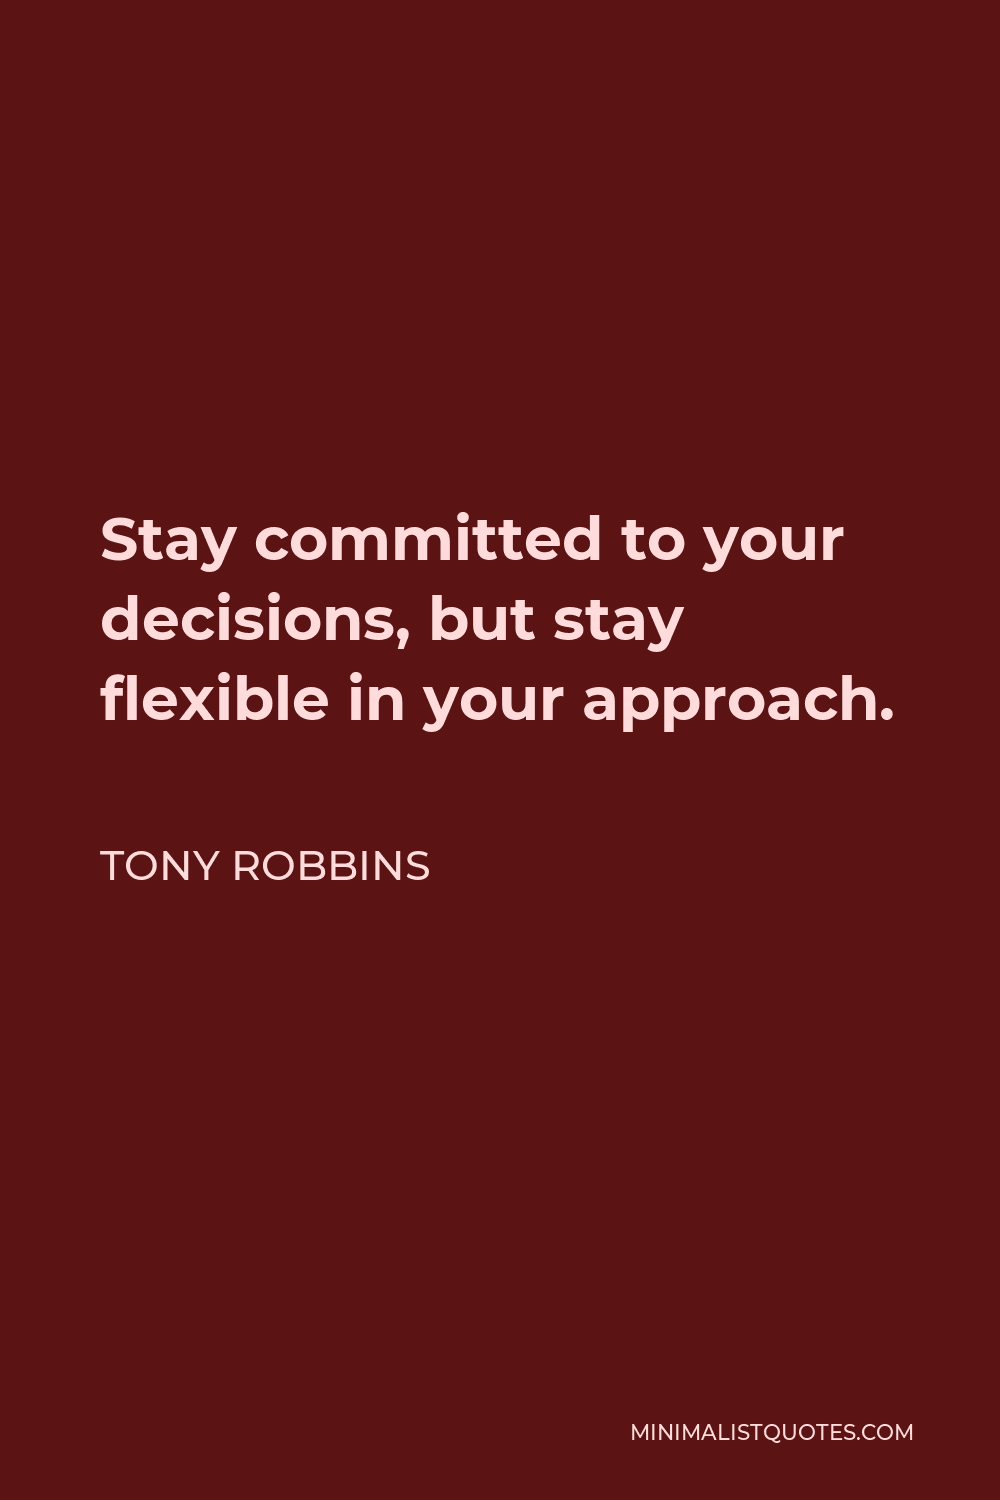 Tony Robbins Quote - Stay committed to your decisions, but stay flexible in your approach.